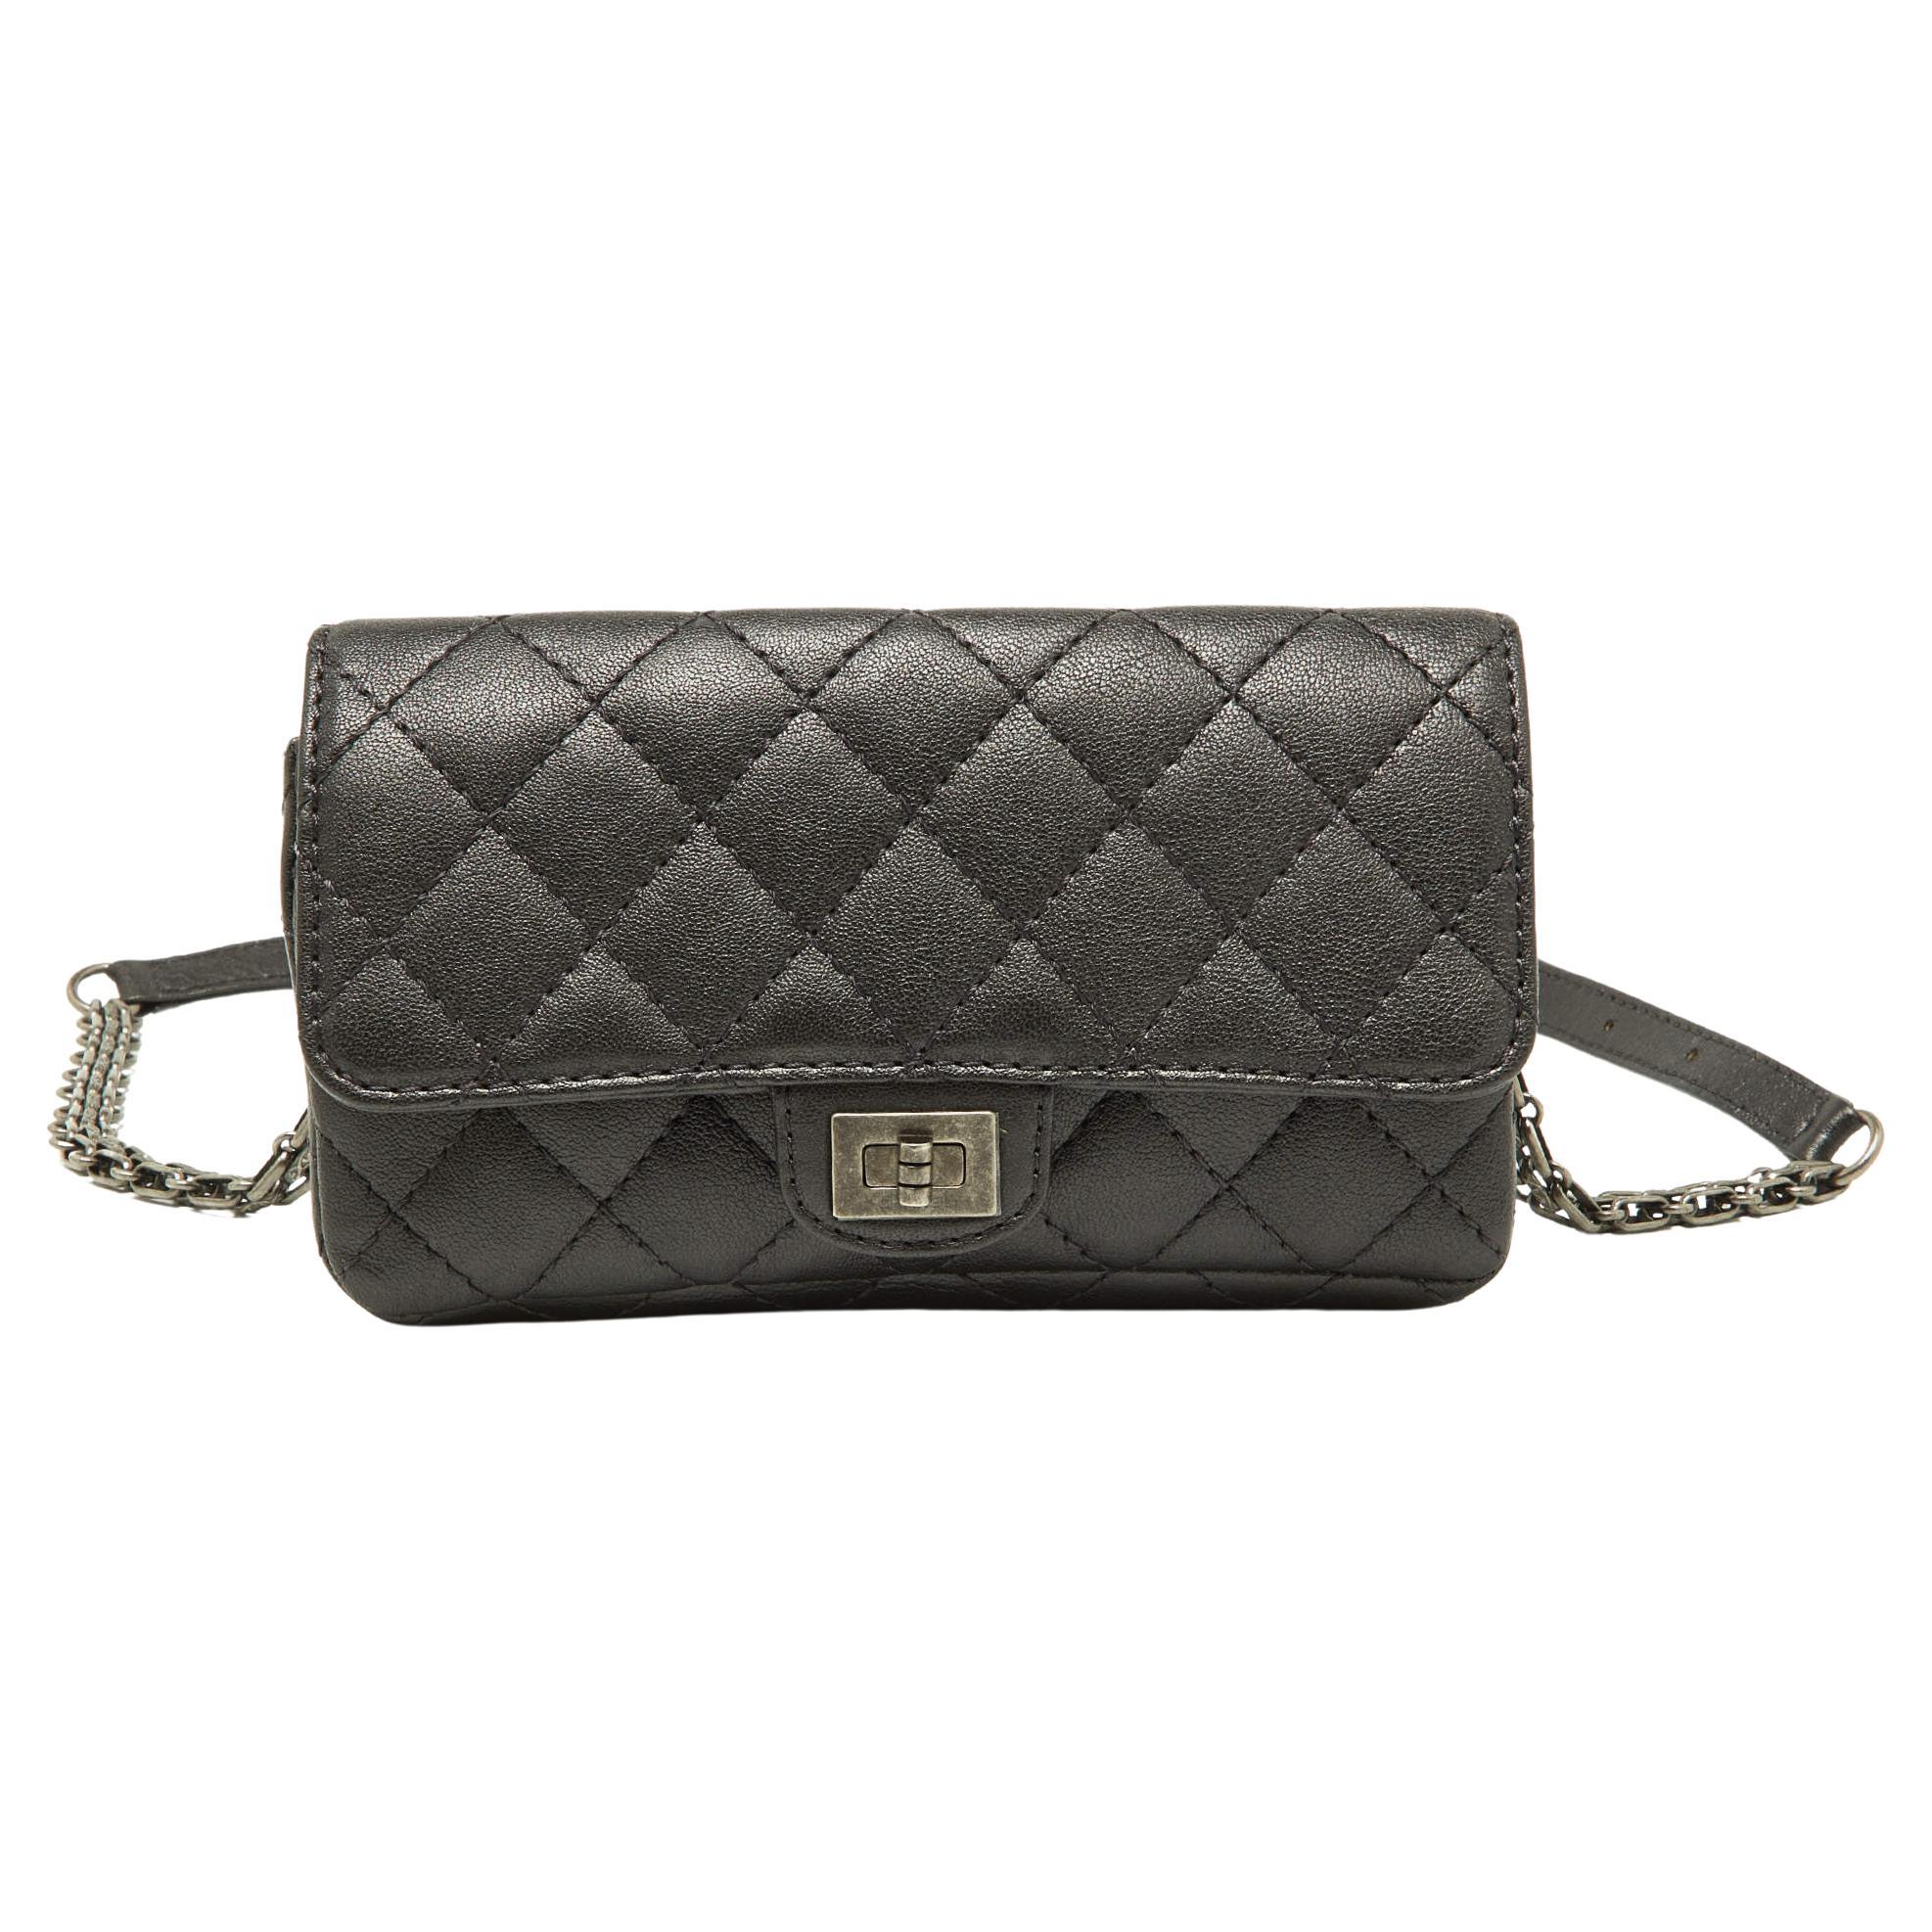 Chanel Grey Quilted Leather Reissue 2.55 Waist Belt Bag For Sale